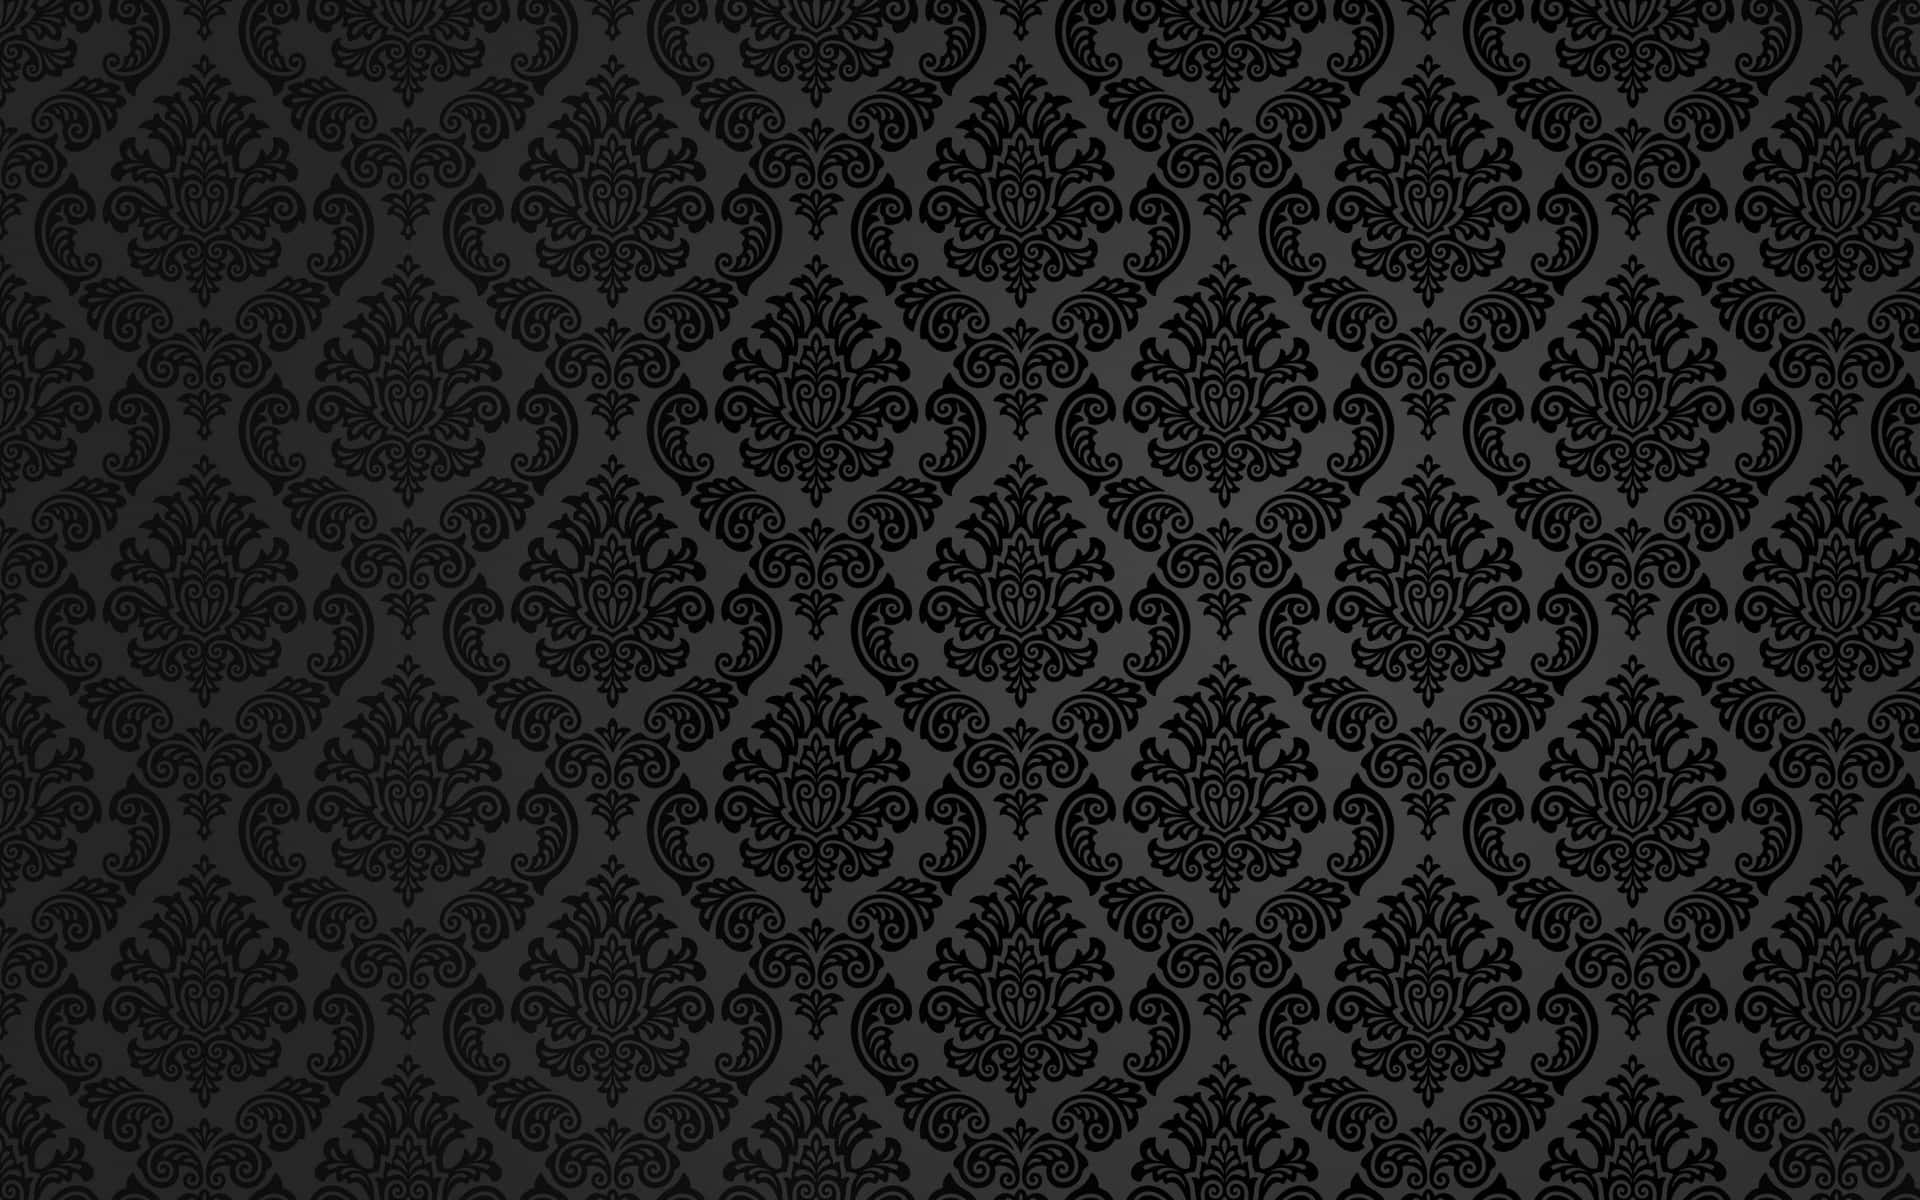 Create your own unique pattern right on your desktop with Pattern Desktop. Wallpaper